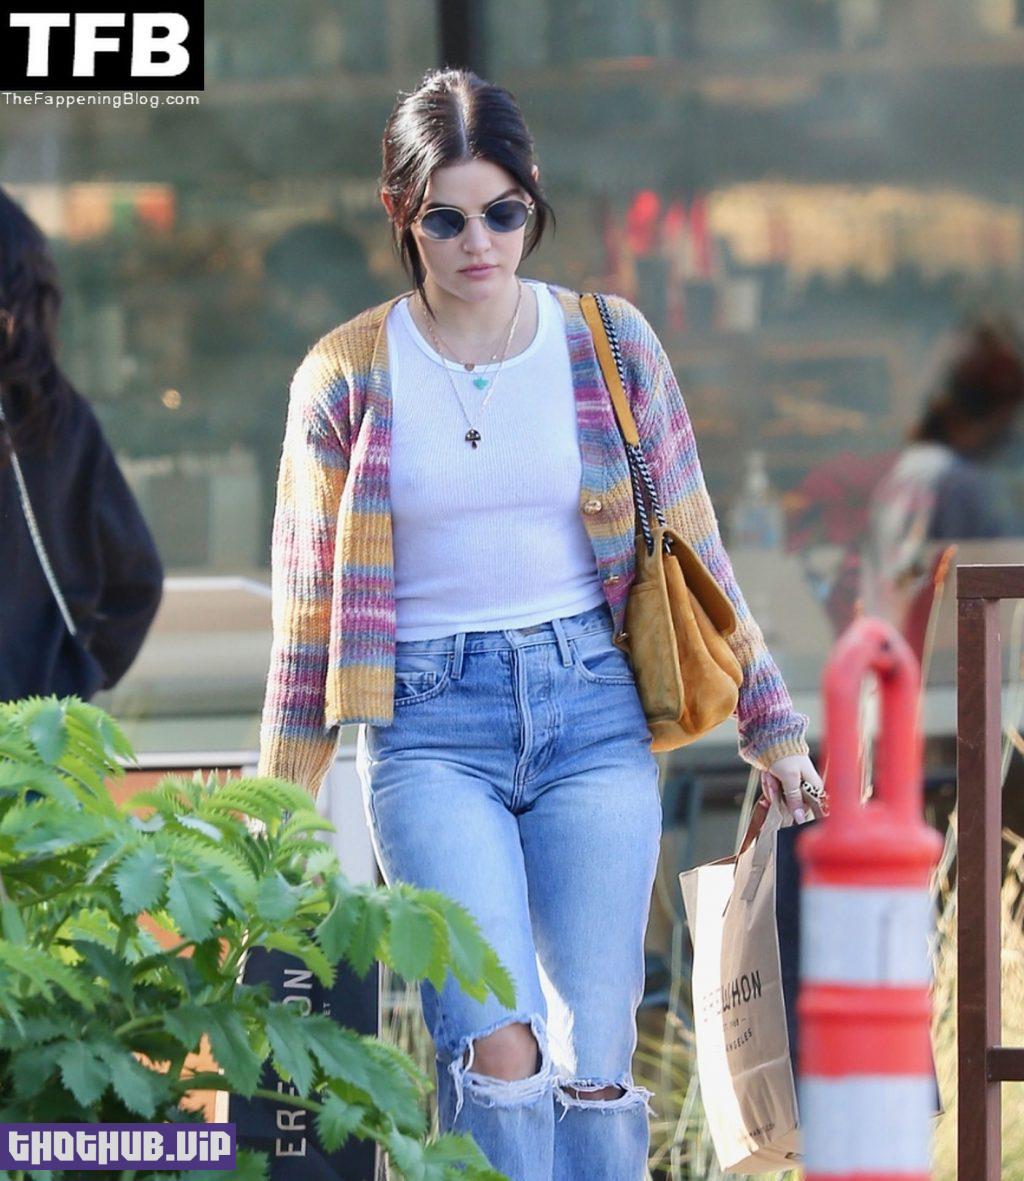 Lucy Hale Braless Pokies The Fappening Blog 22